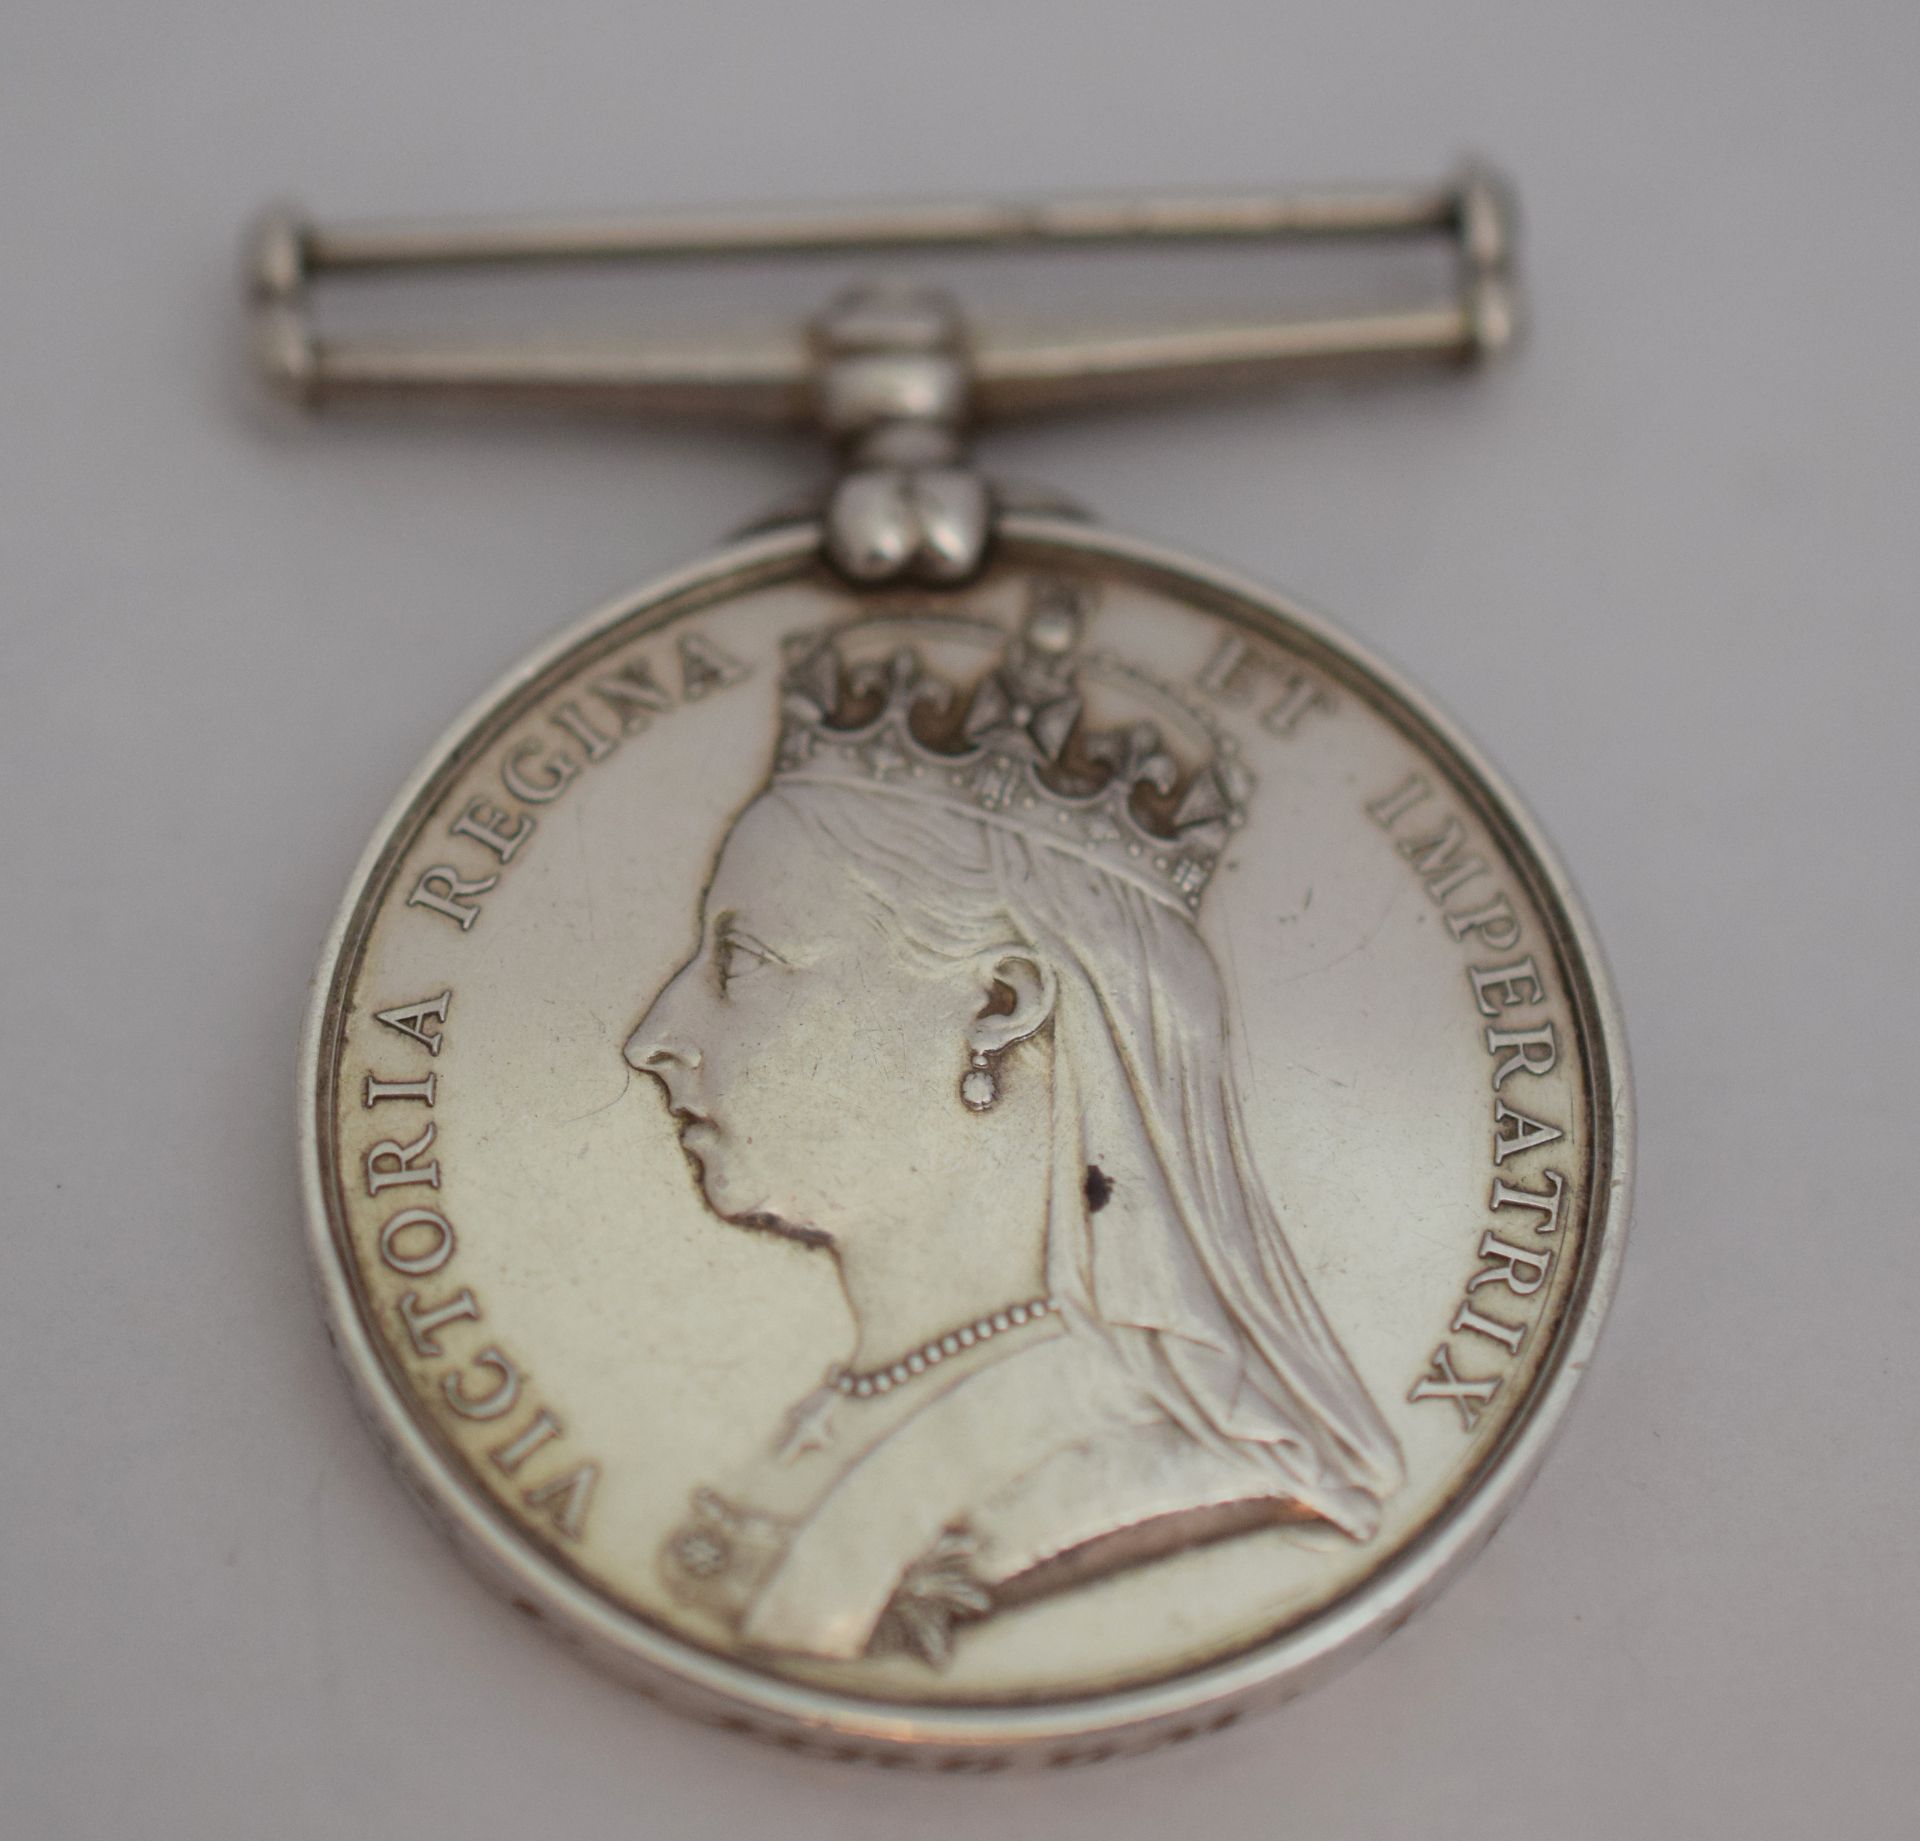 Afganistan 1878/79/80s Silver Medal With Bar